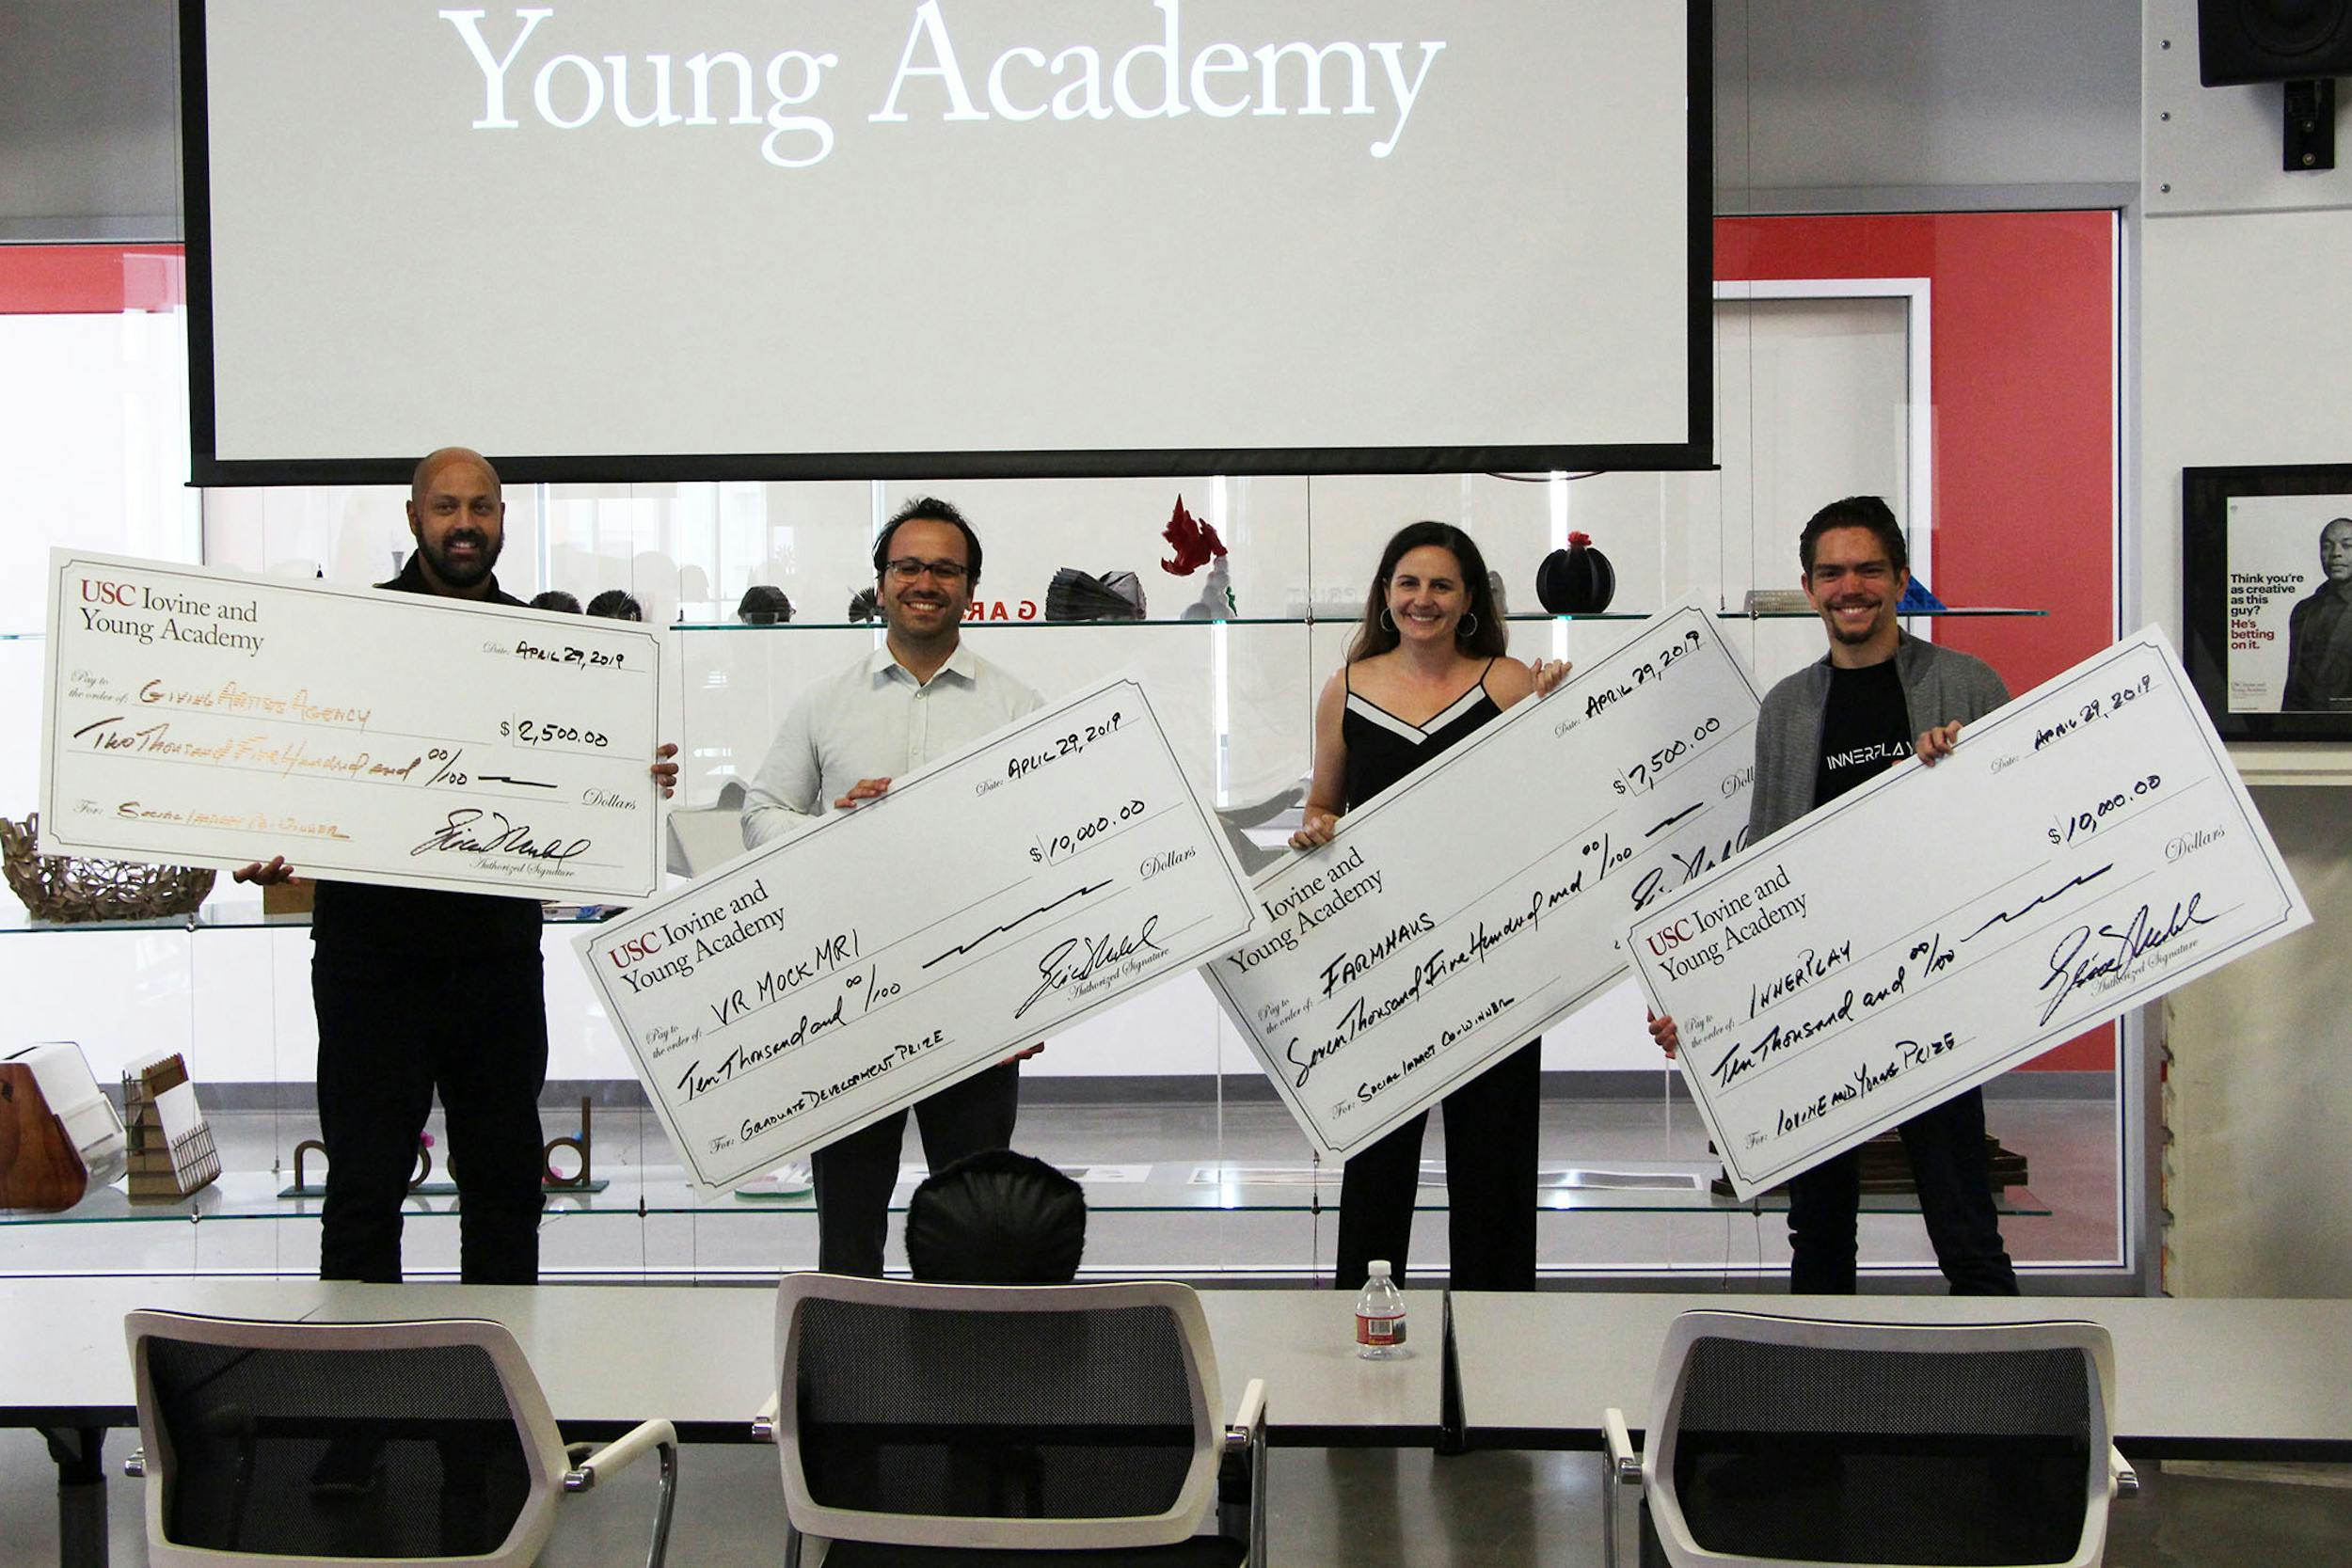 4 students each holding giant checks